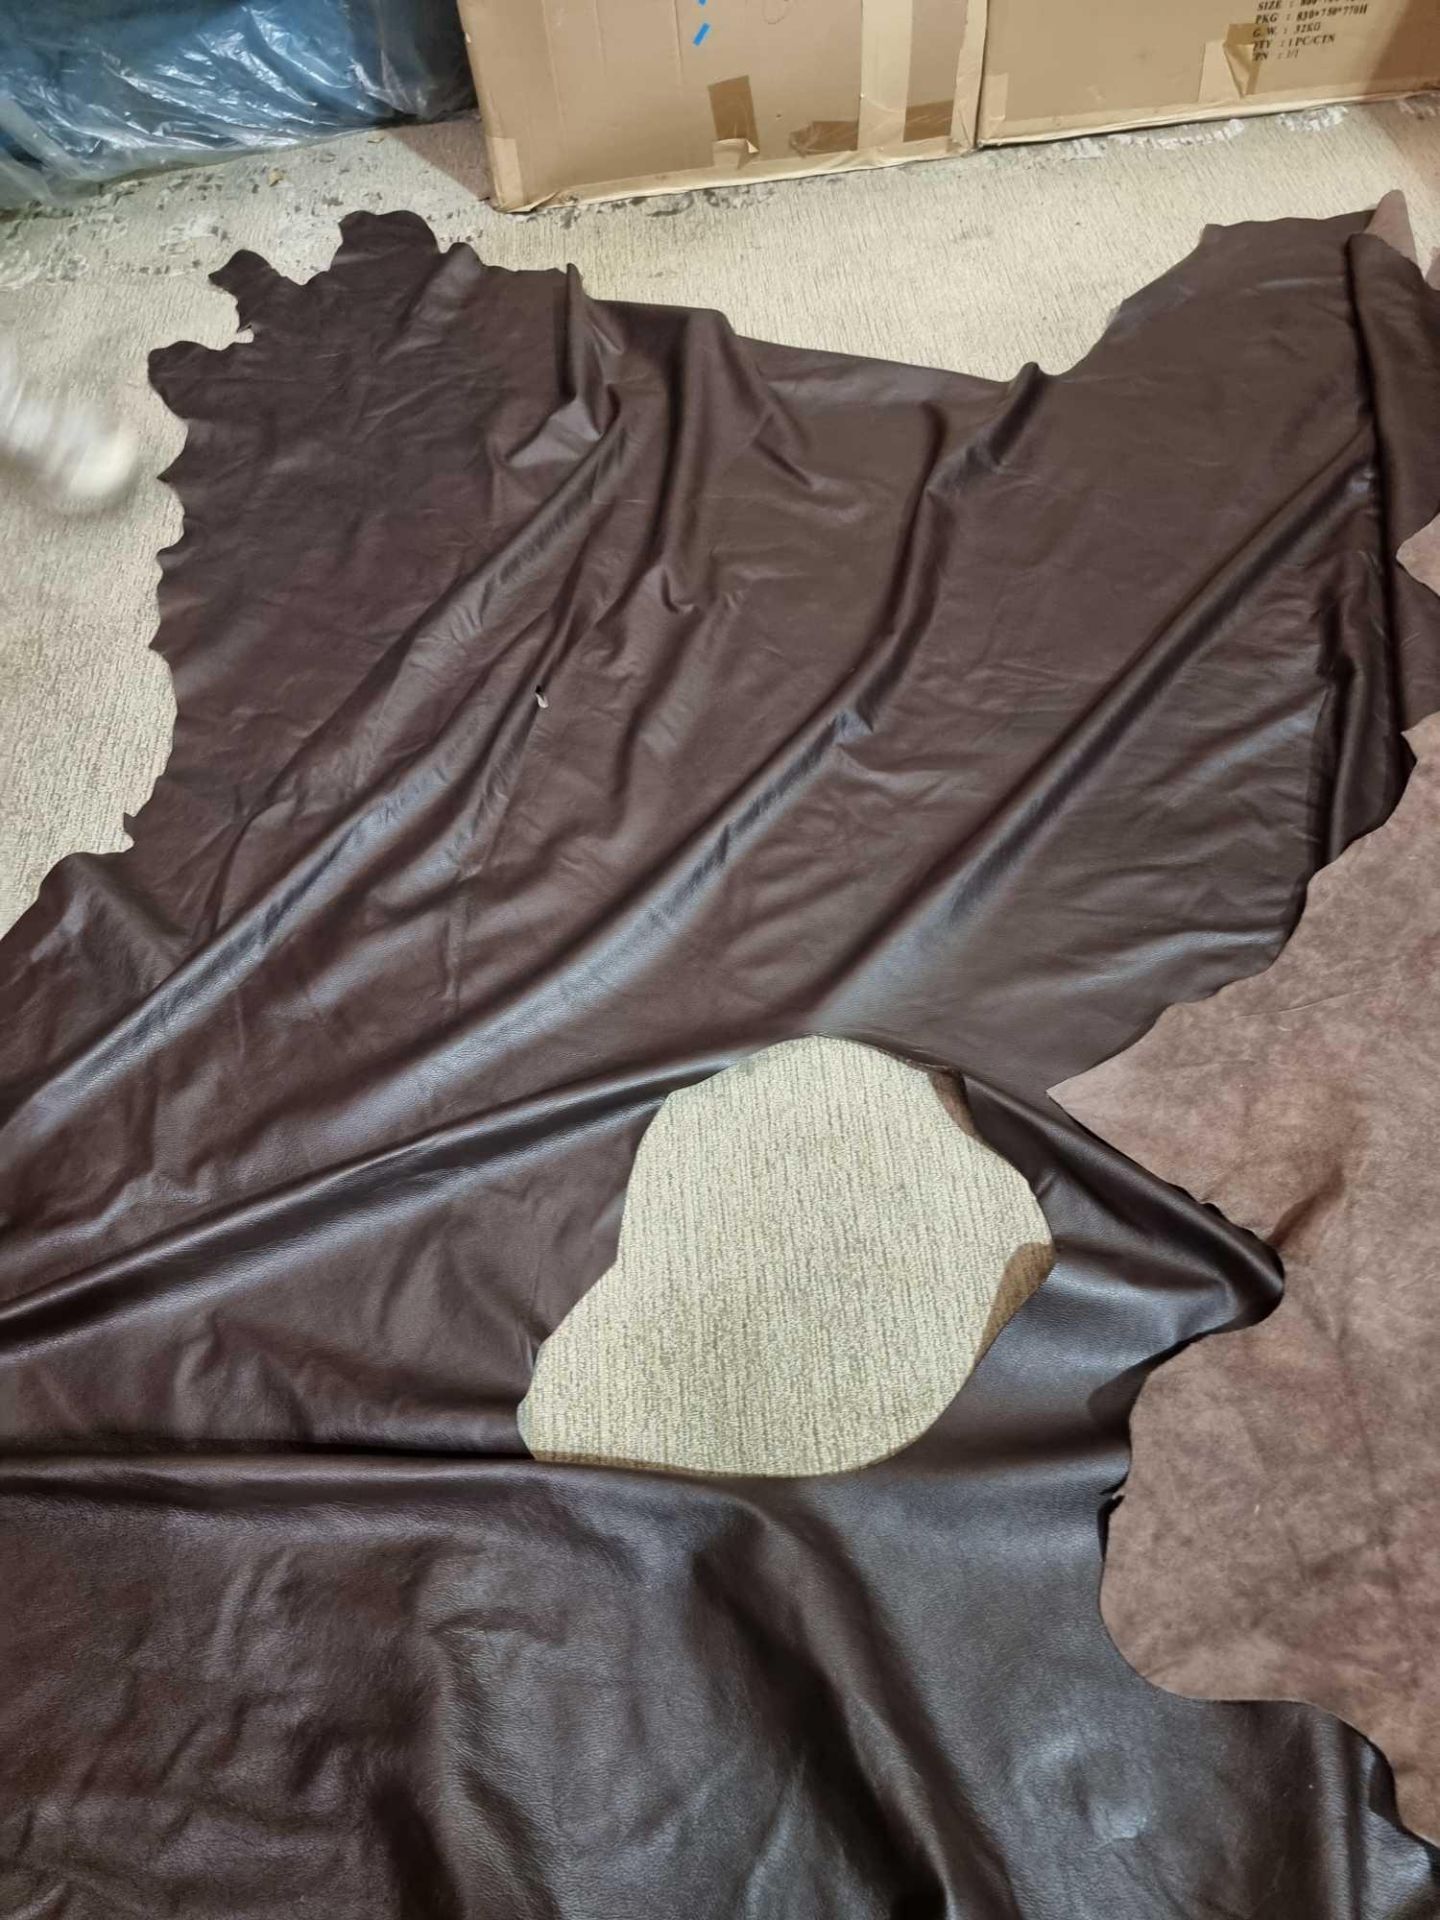 Chocolate Brown Leather Hide approximately 3 23M2 1 9 x 1 7cm ( Hide No,203) - Image 2 of 2